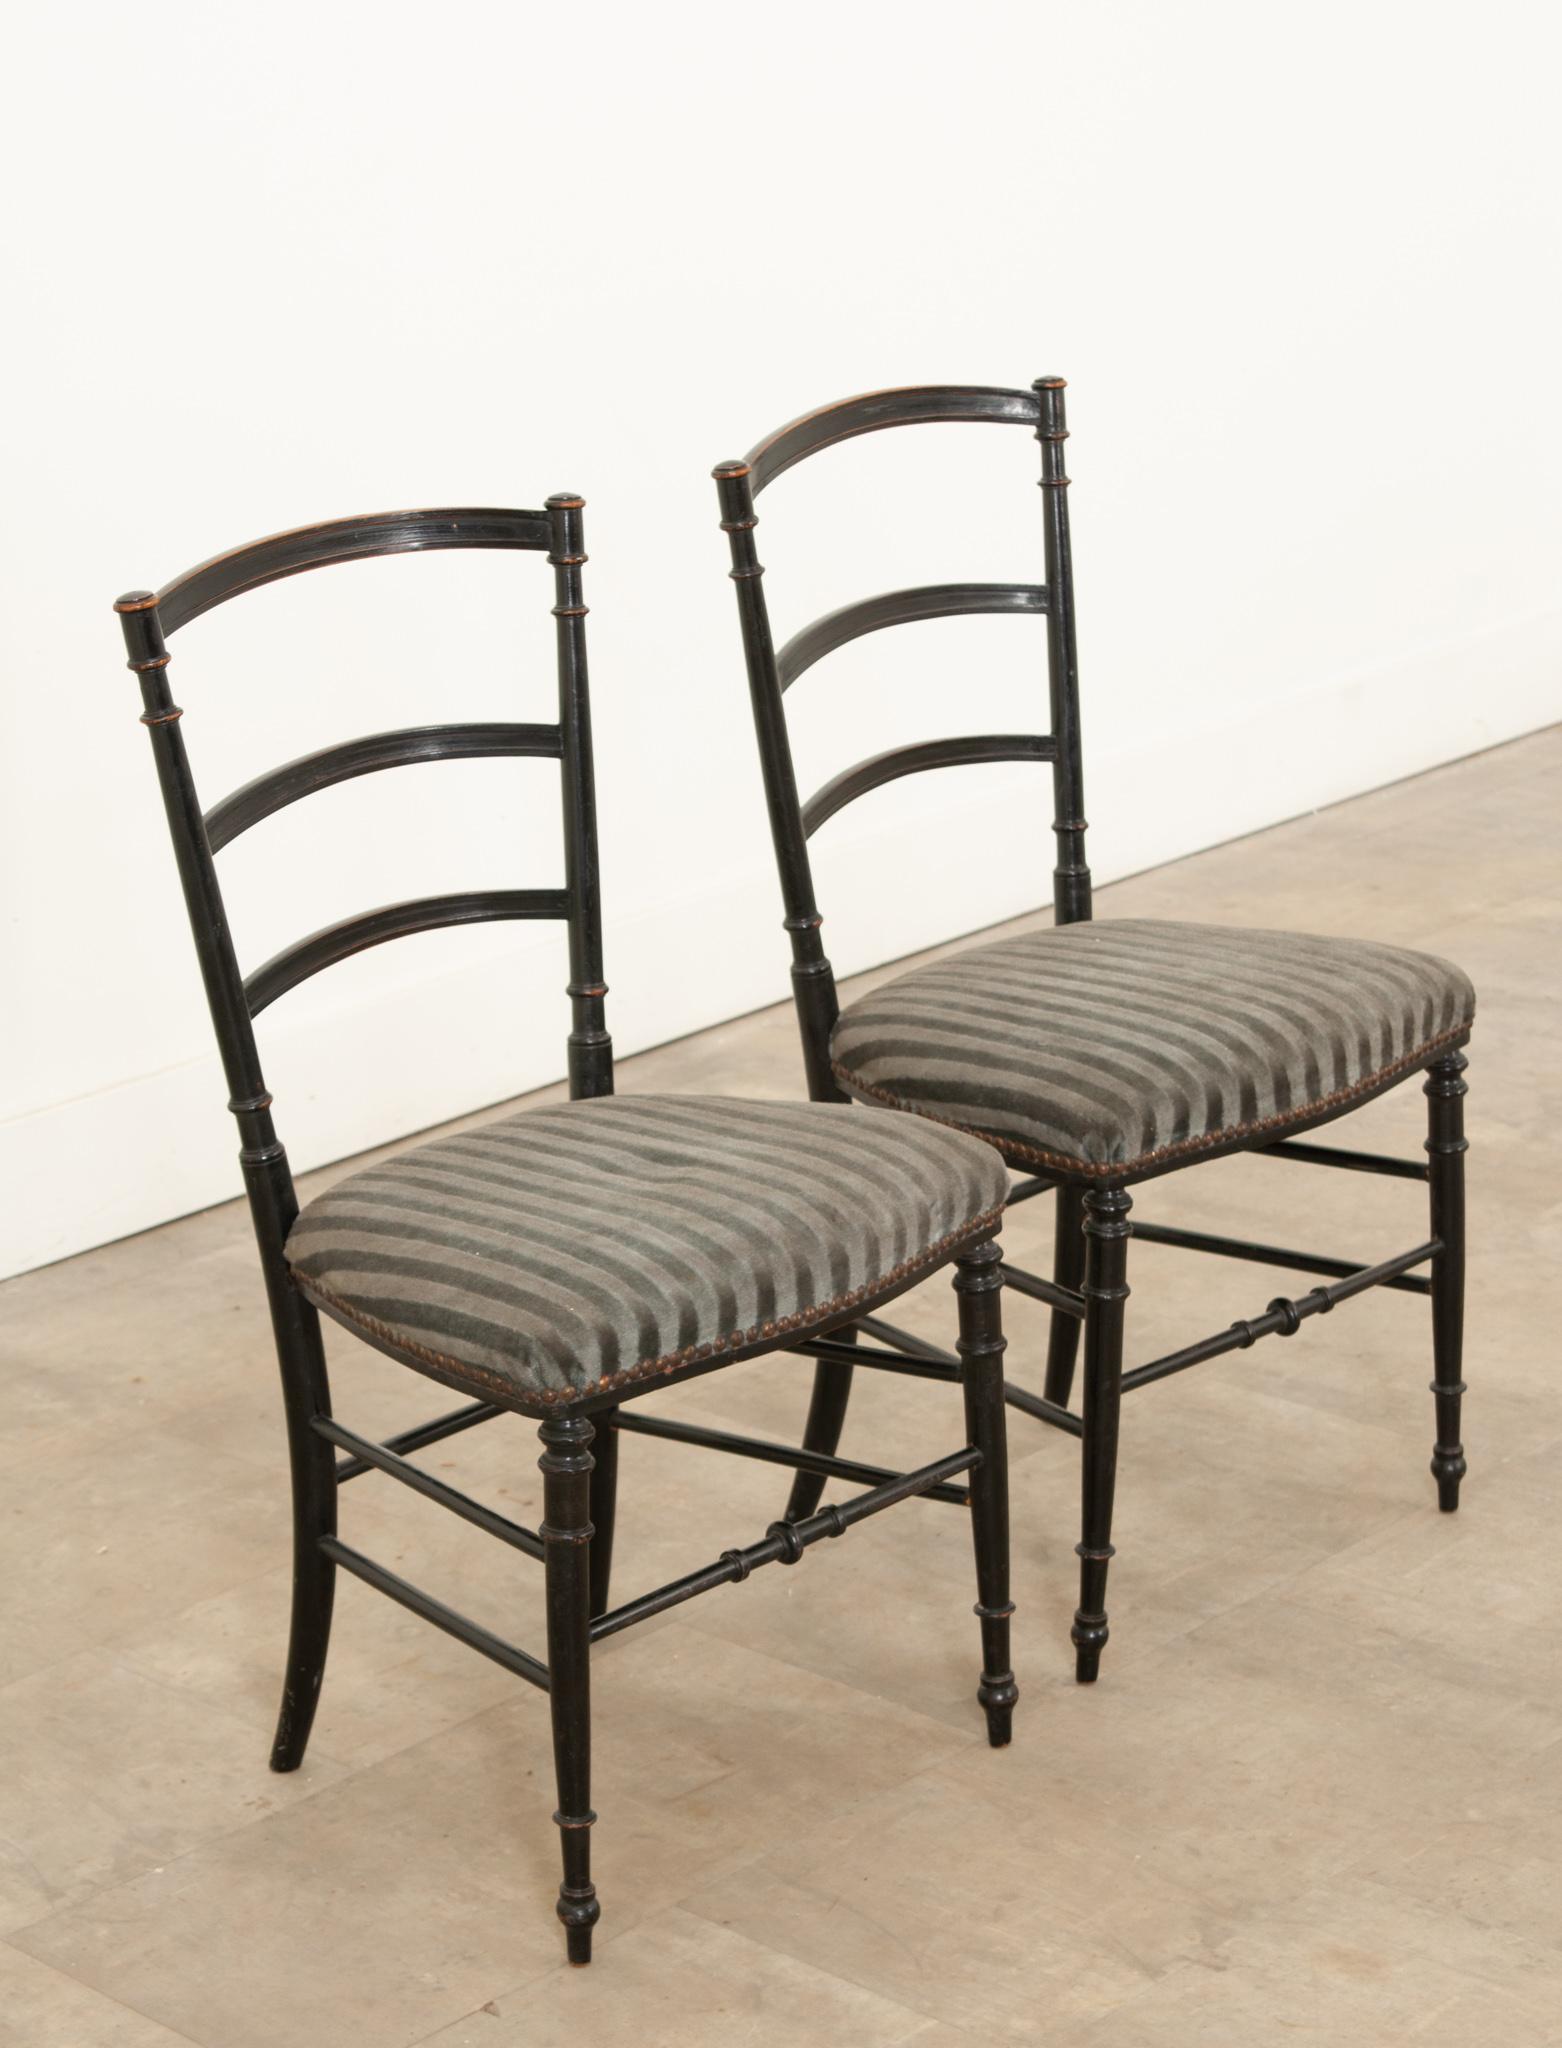 This is a superb pair of  Napoleon III era opera chairs that date to the 1850s. These exceptional, ebonized chairs feature excellently patinated ladder back supports with comfortable and tightly upholstered seats on well supported legs. The chairs